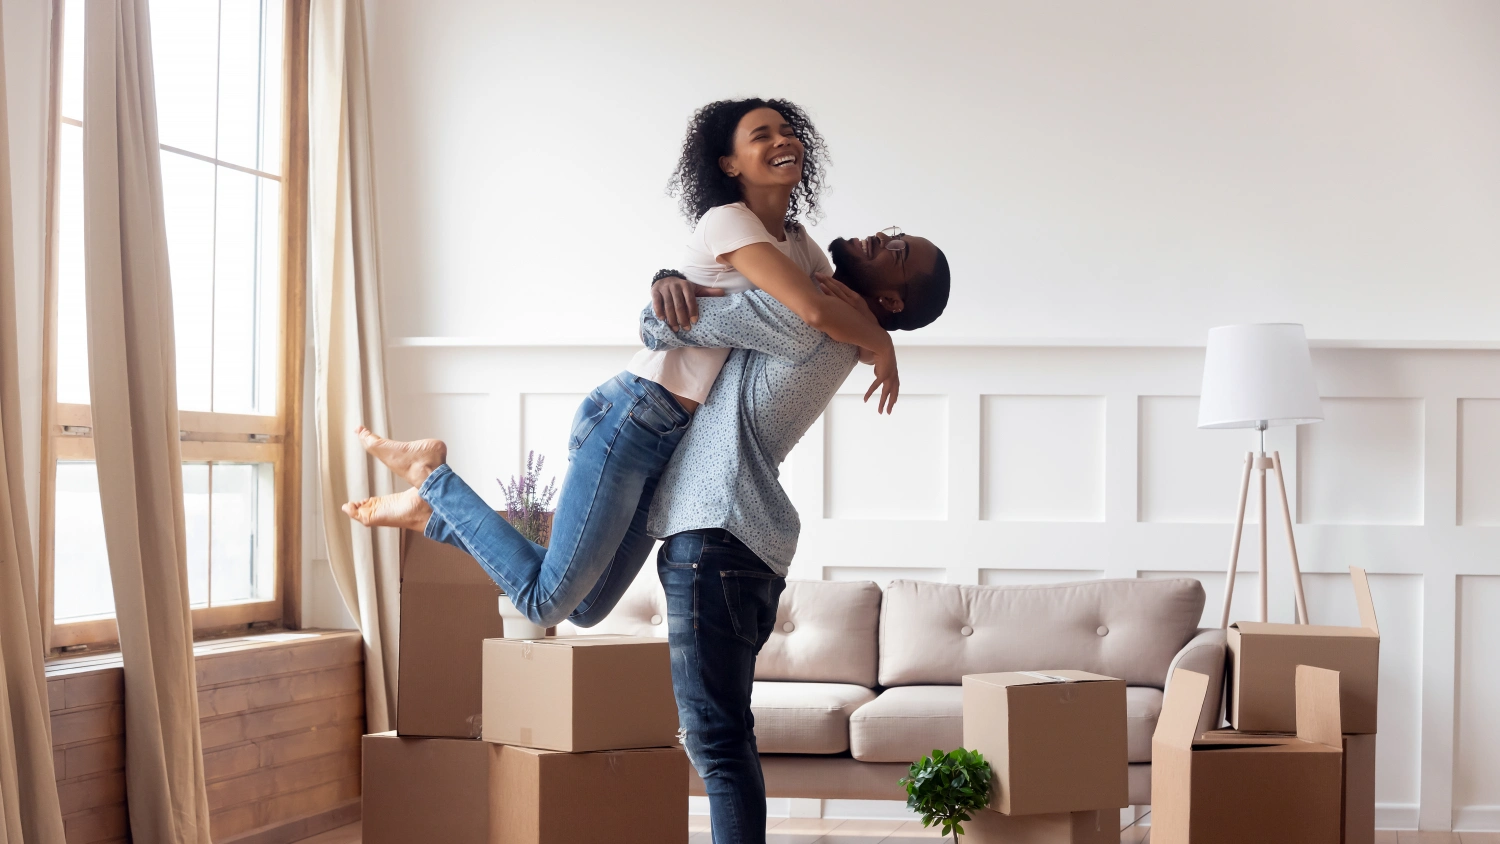  Relocating for Love: Tips for Couples Moving In Together